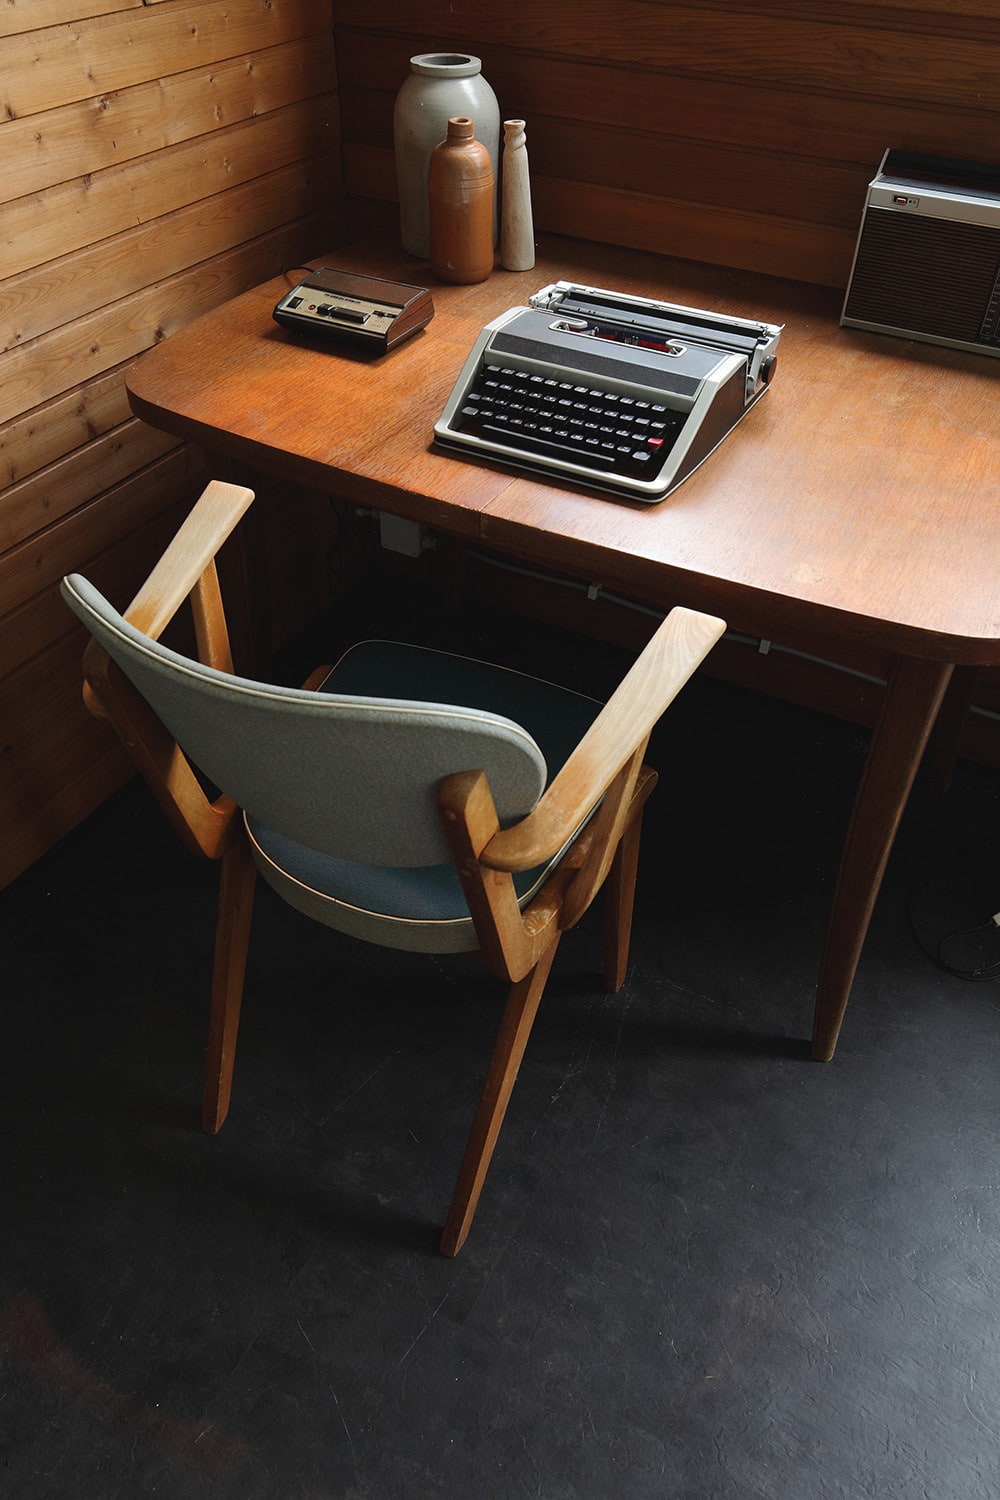 Sixties Work Desk In An Old Cabin